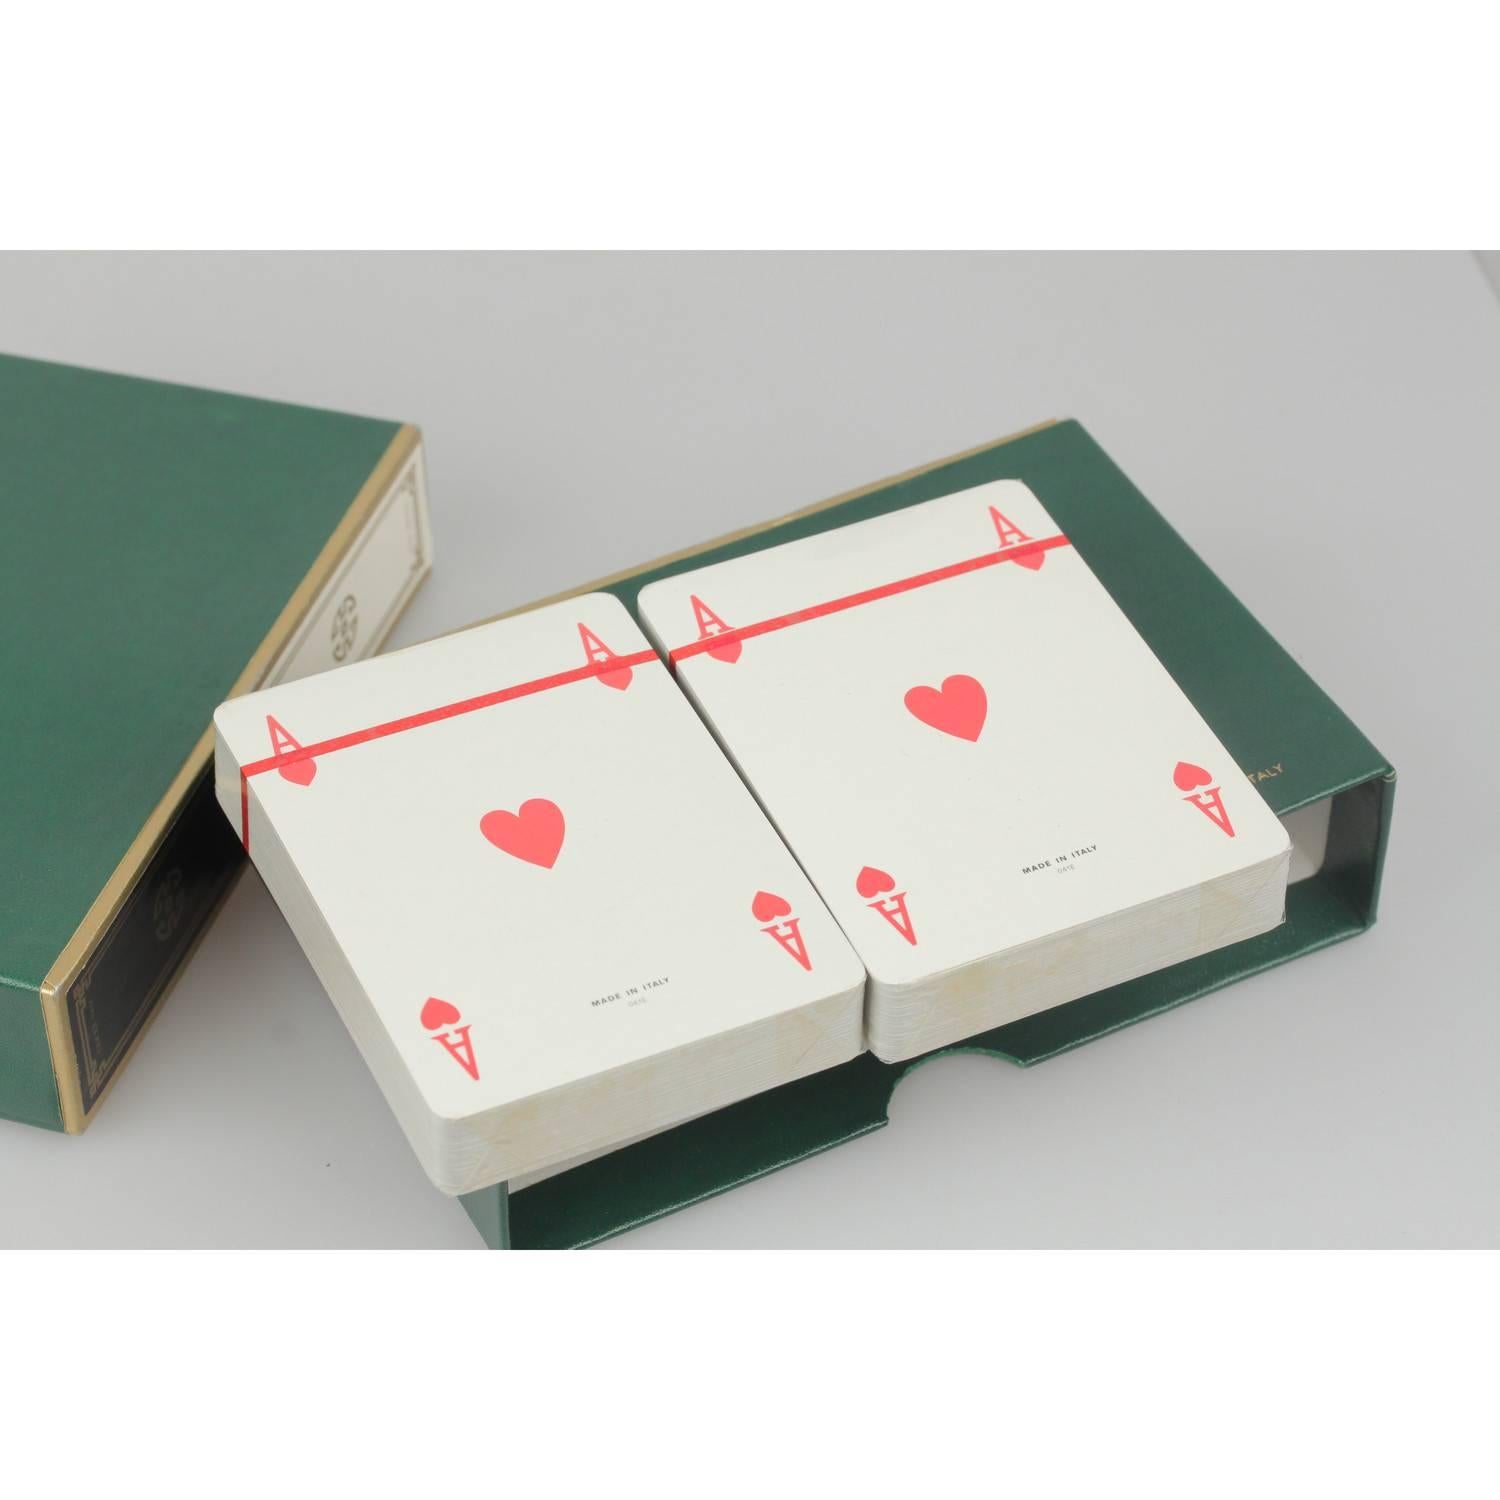 - Very nice & unique GUCCI vintage boxed set of French playing cards 
- 2 Decks in 2 different color (Black, White) 
- GG - GUCCI logo on the back of every card 
- Each deck is wrapped
- The cards are housed in a green GUCCI box 
- Measurements of